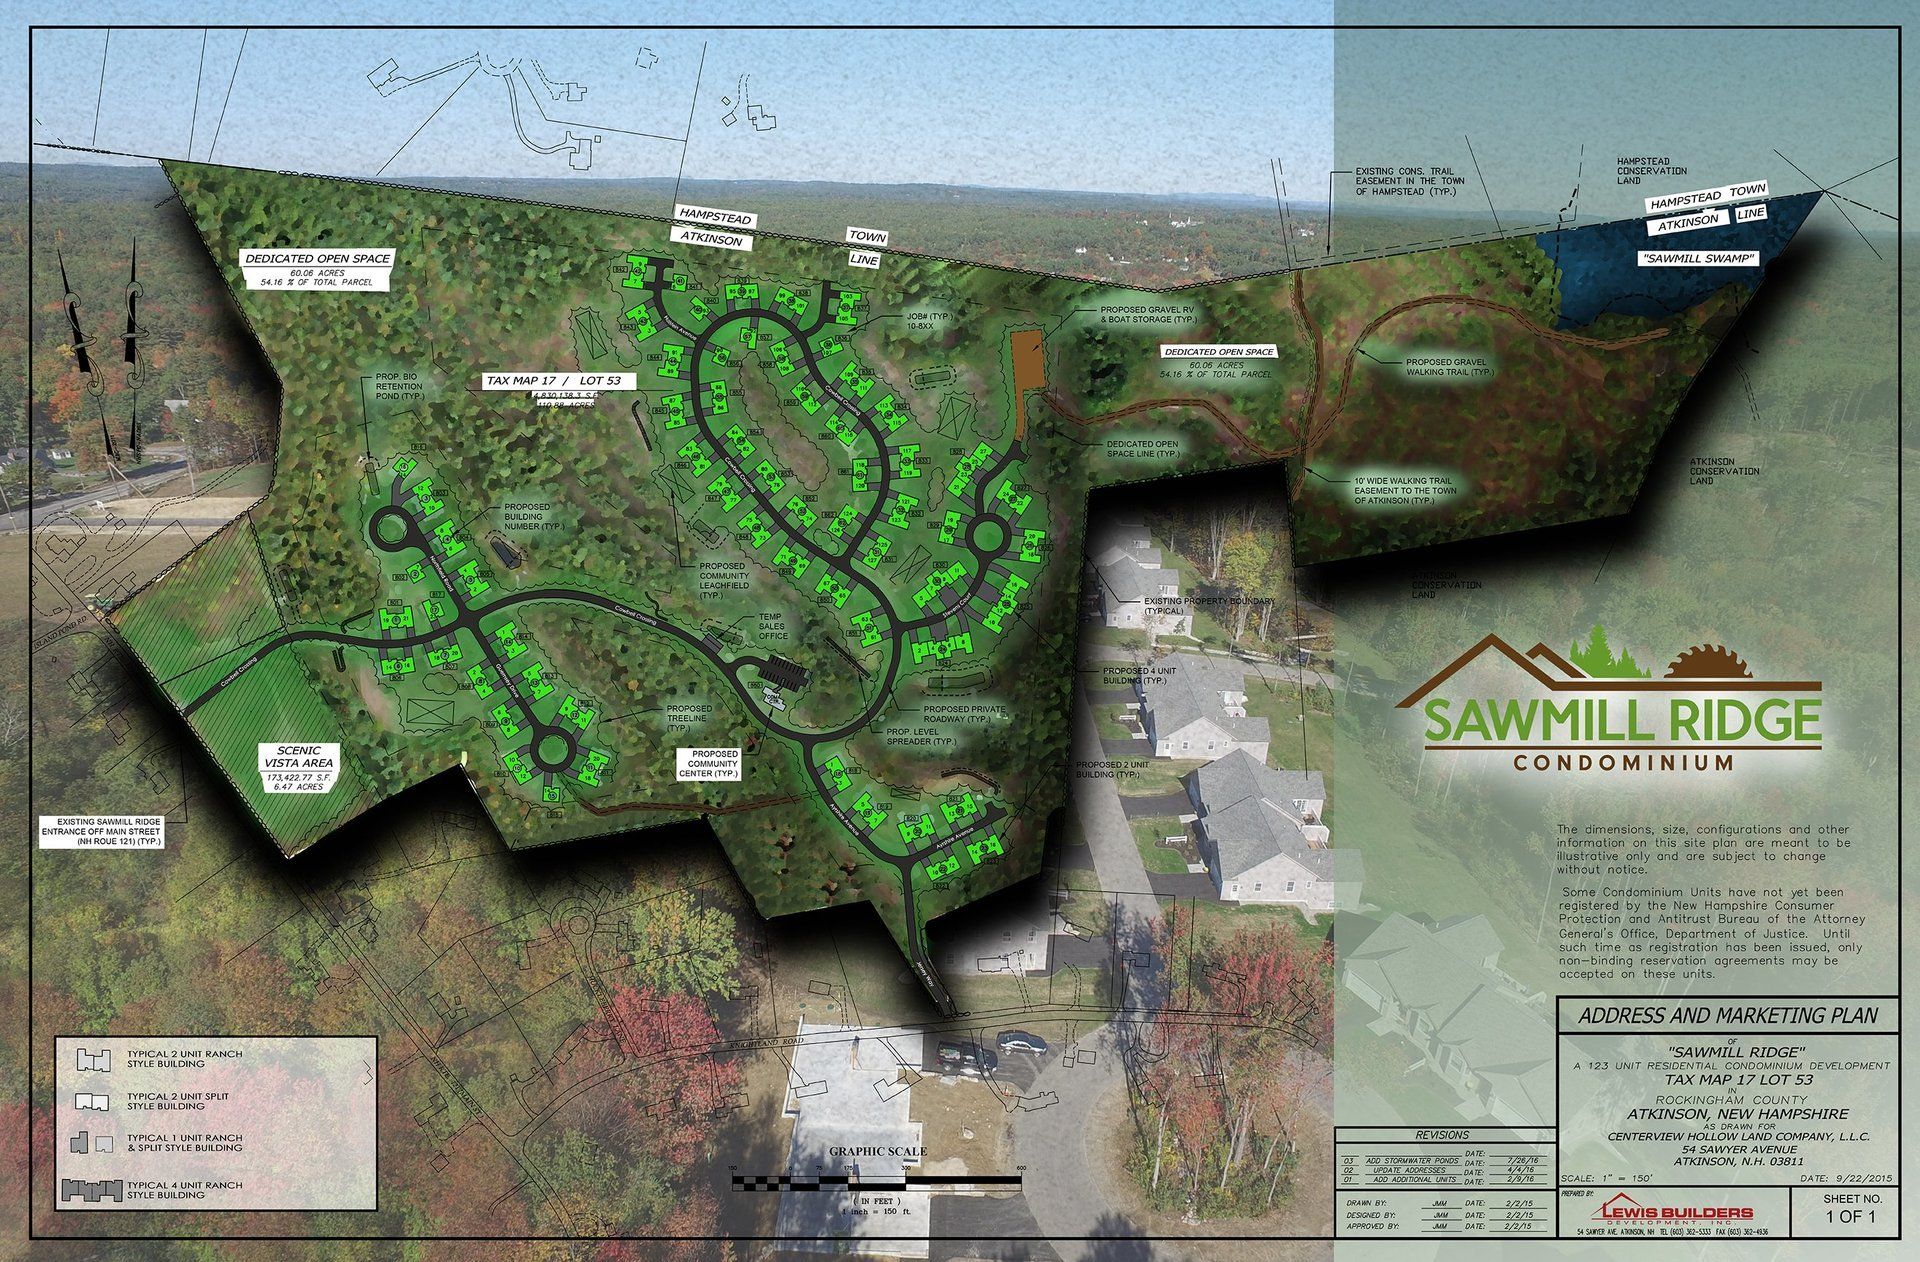 Click to open larger image of Sawmill Ridge Site Plan and zoom in for details